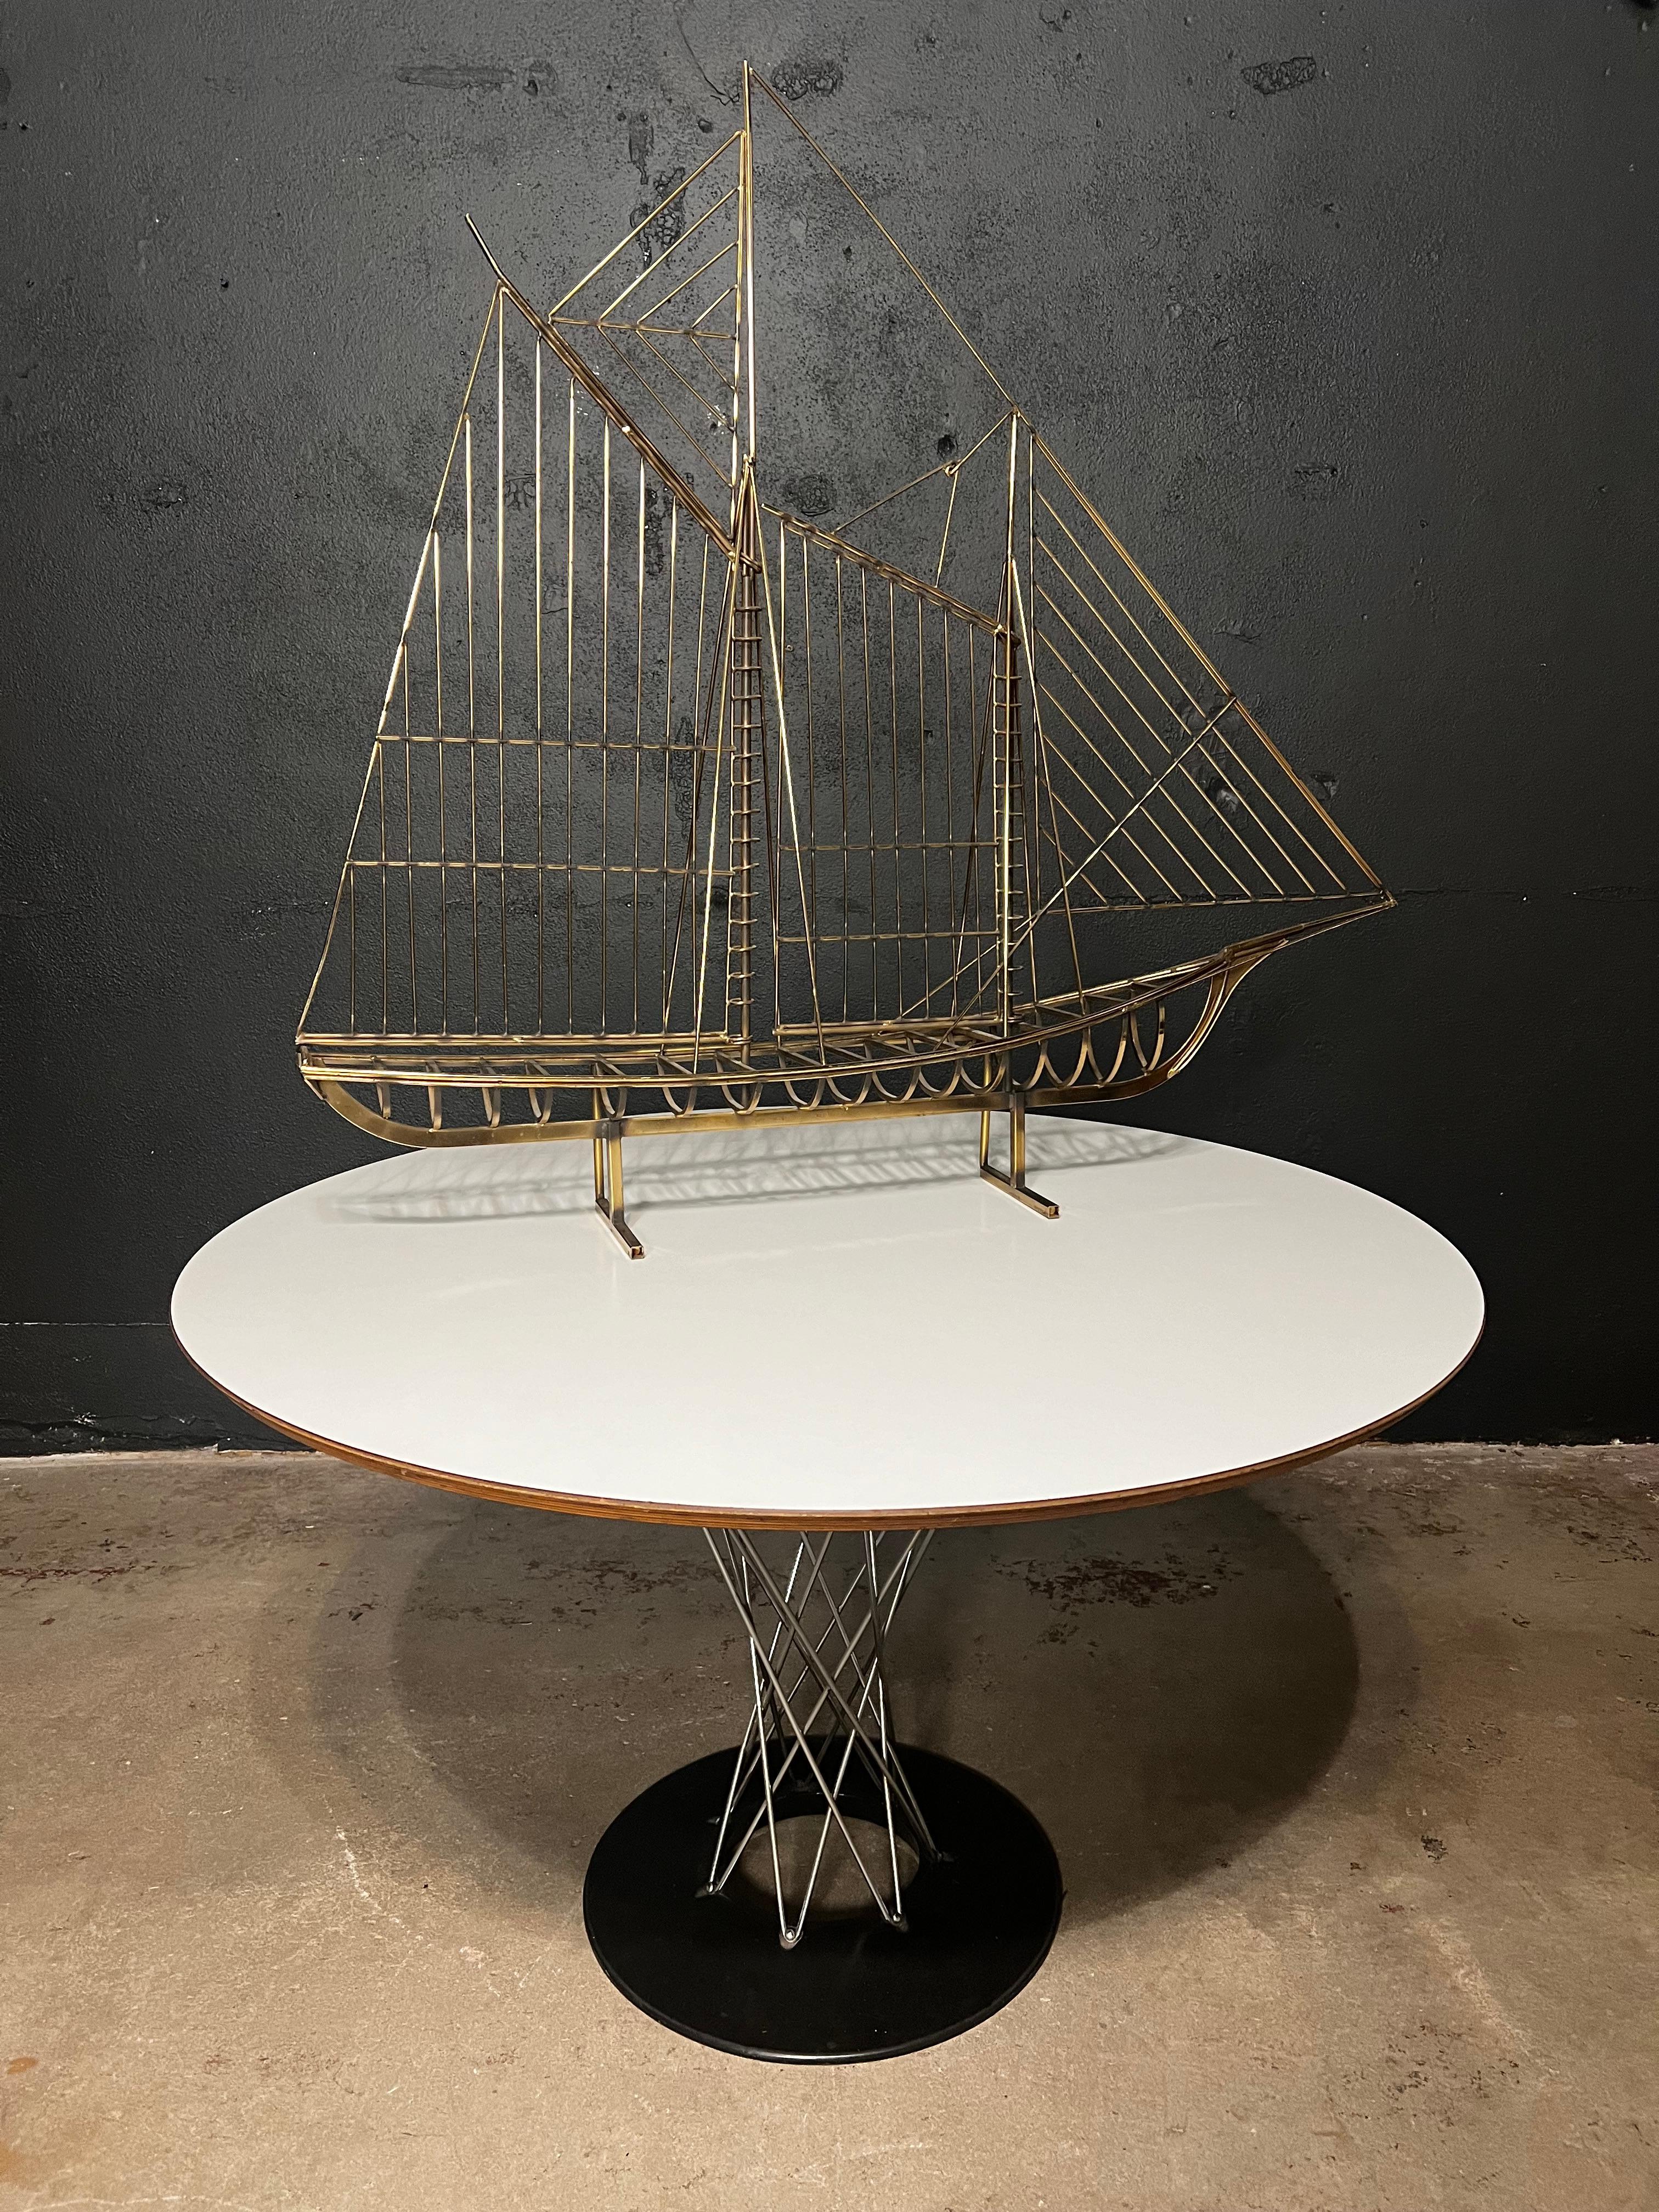 The large wire boat by C. Jere is a captivating sculpture that masterfully combines craftsmanship and artistic flair. Created by Curtis Jere, known for their wonderfully designed metal wall sculptures, this piece features intricately woven wirework